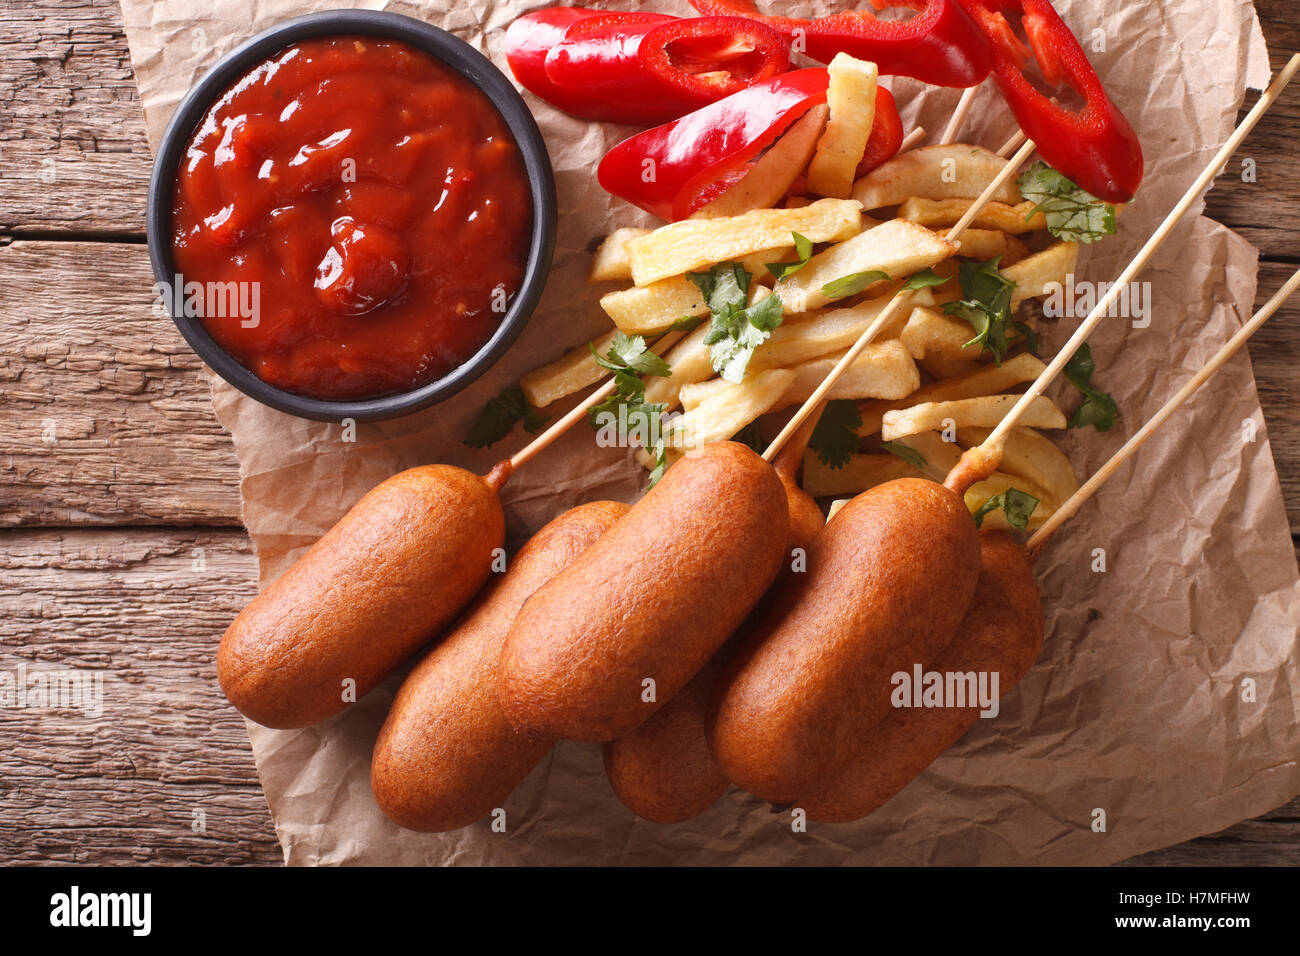 Corn dogs, french fries, pepper and ketchup on the table close-up. Horizontal view from above Stock Photo